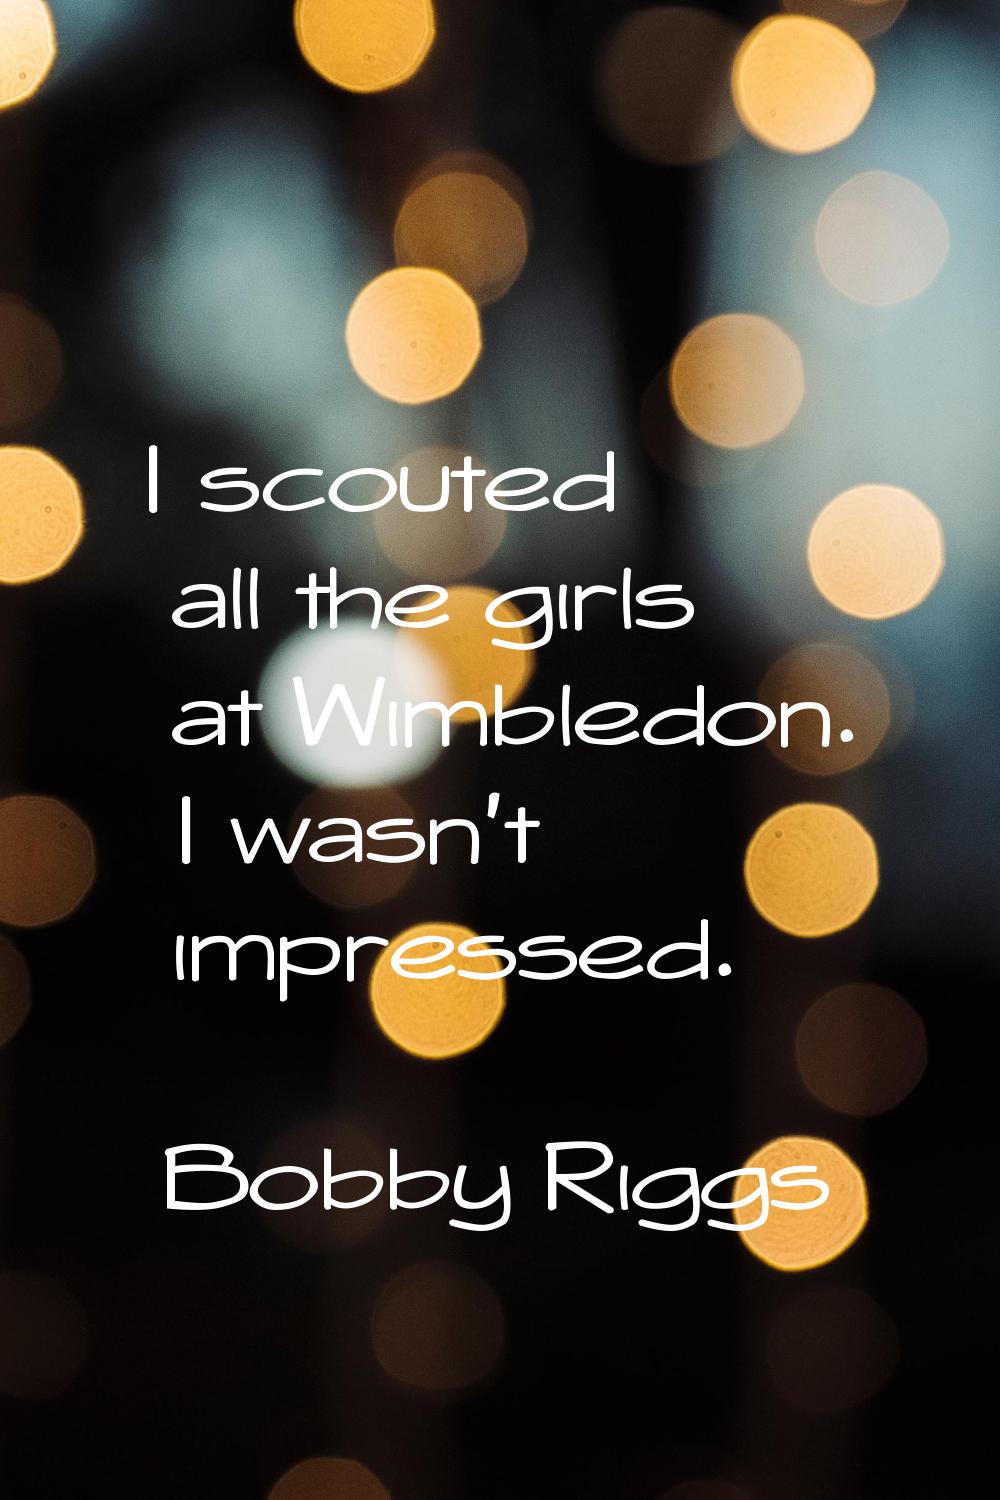 I scouted all the girls at Wimbledon. I wasn't impressed.